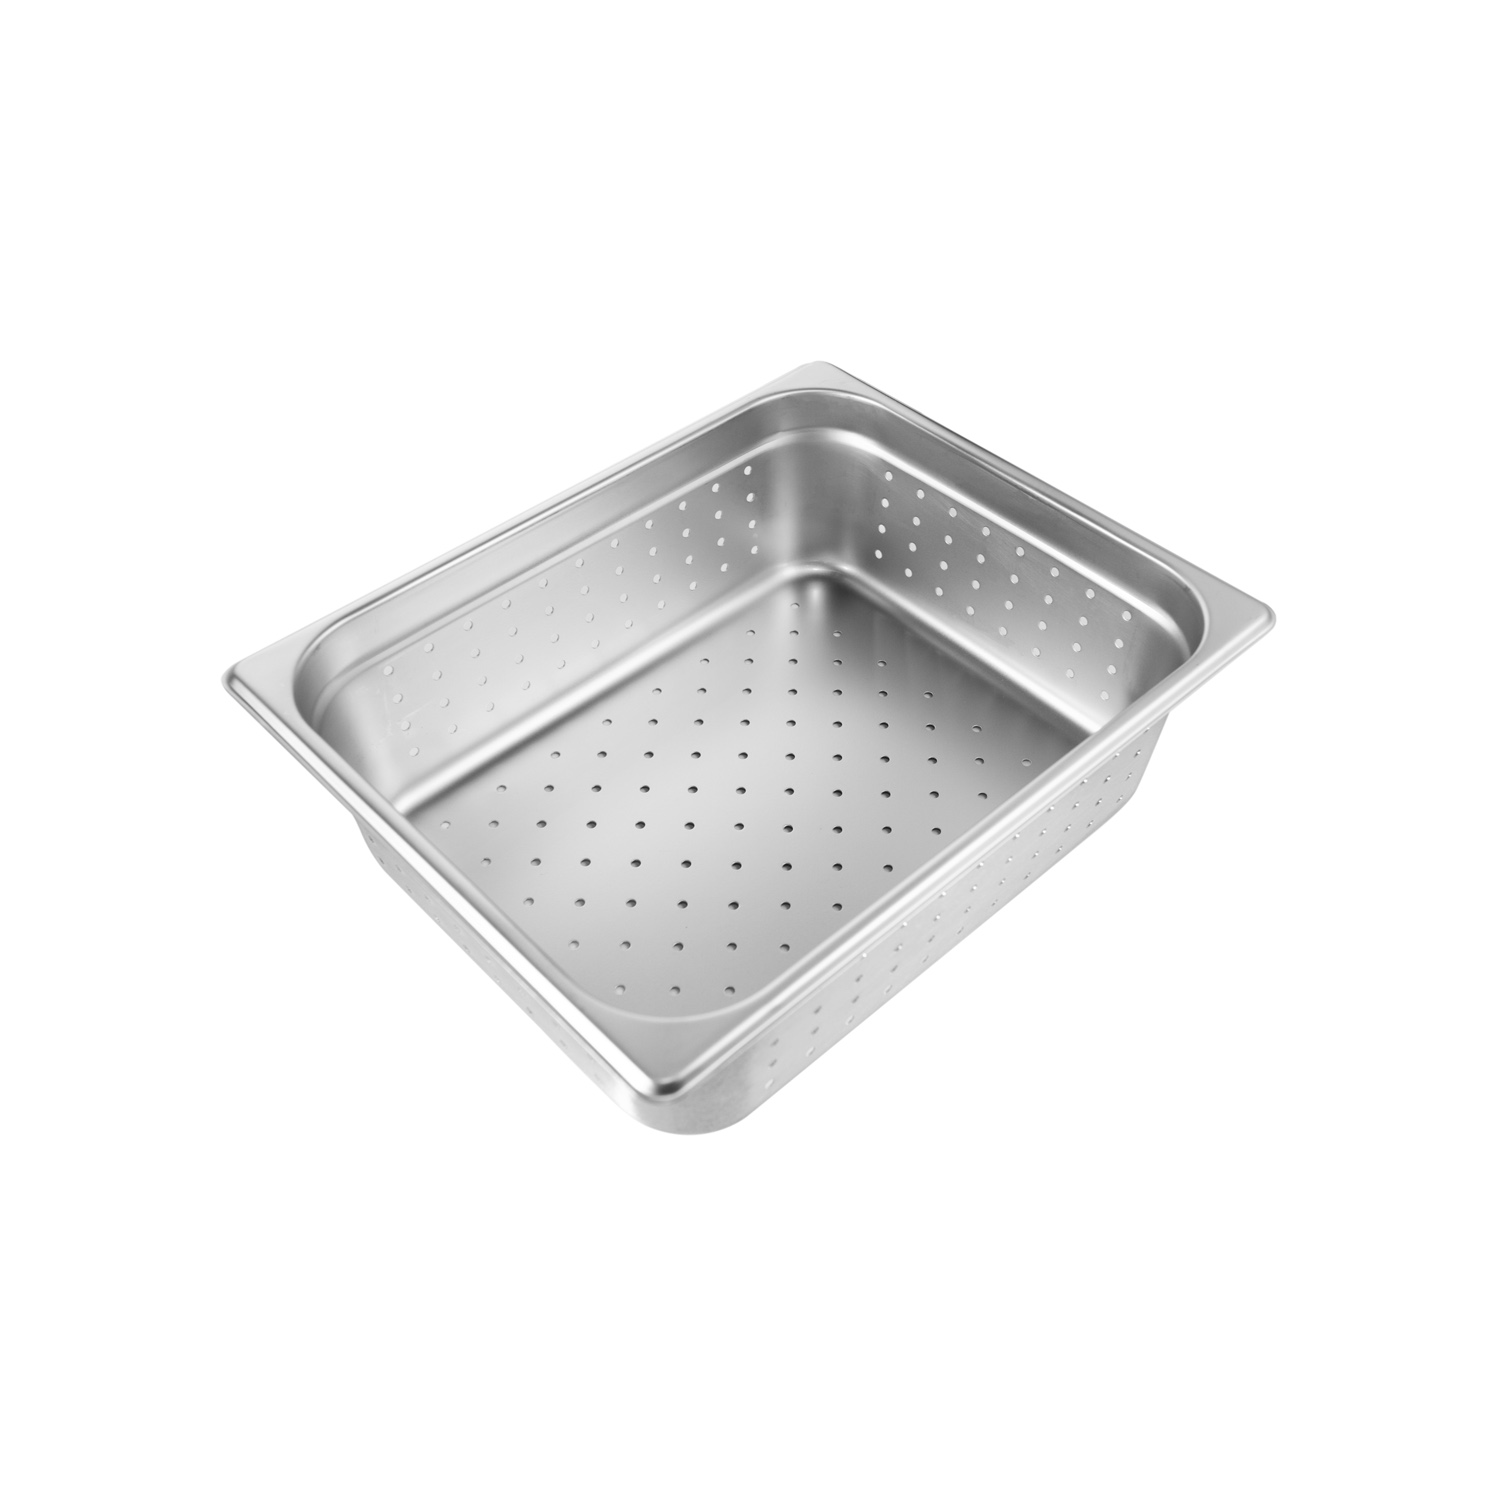 CAC China SSPH-25-4P Half Size 25-Gauge Perforated Stainless Steel Steam Pan 4"